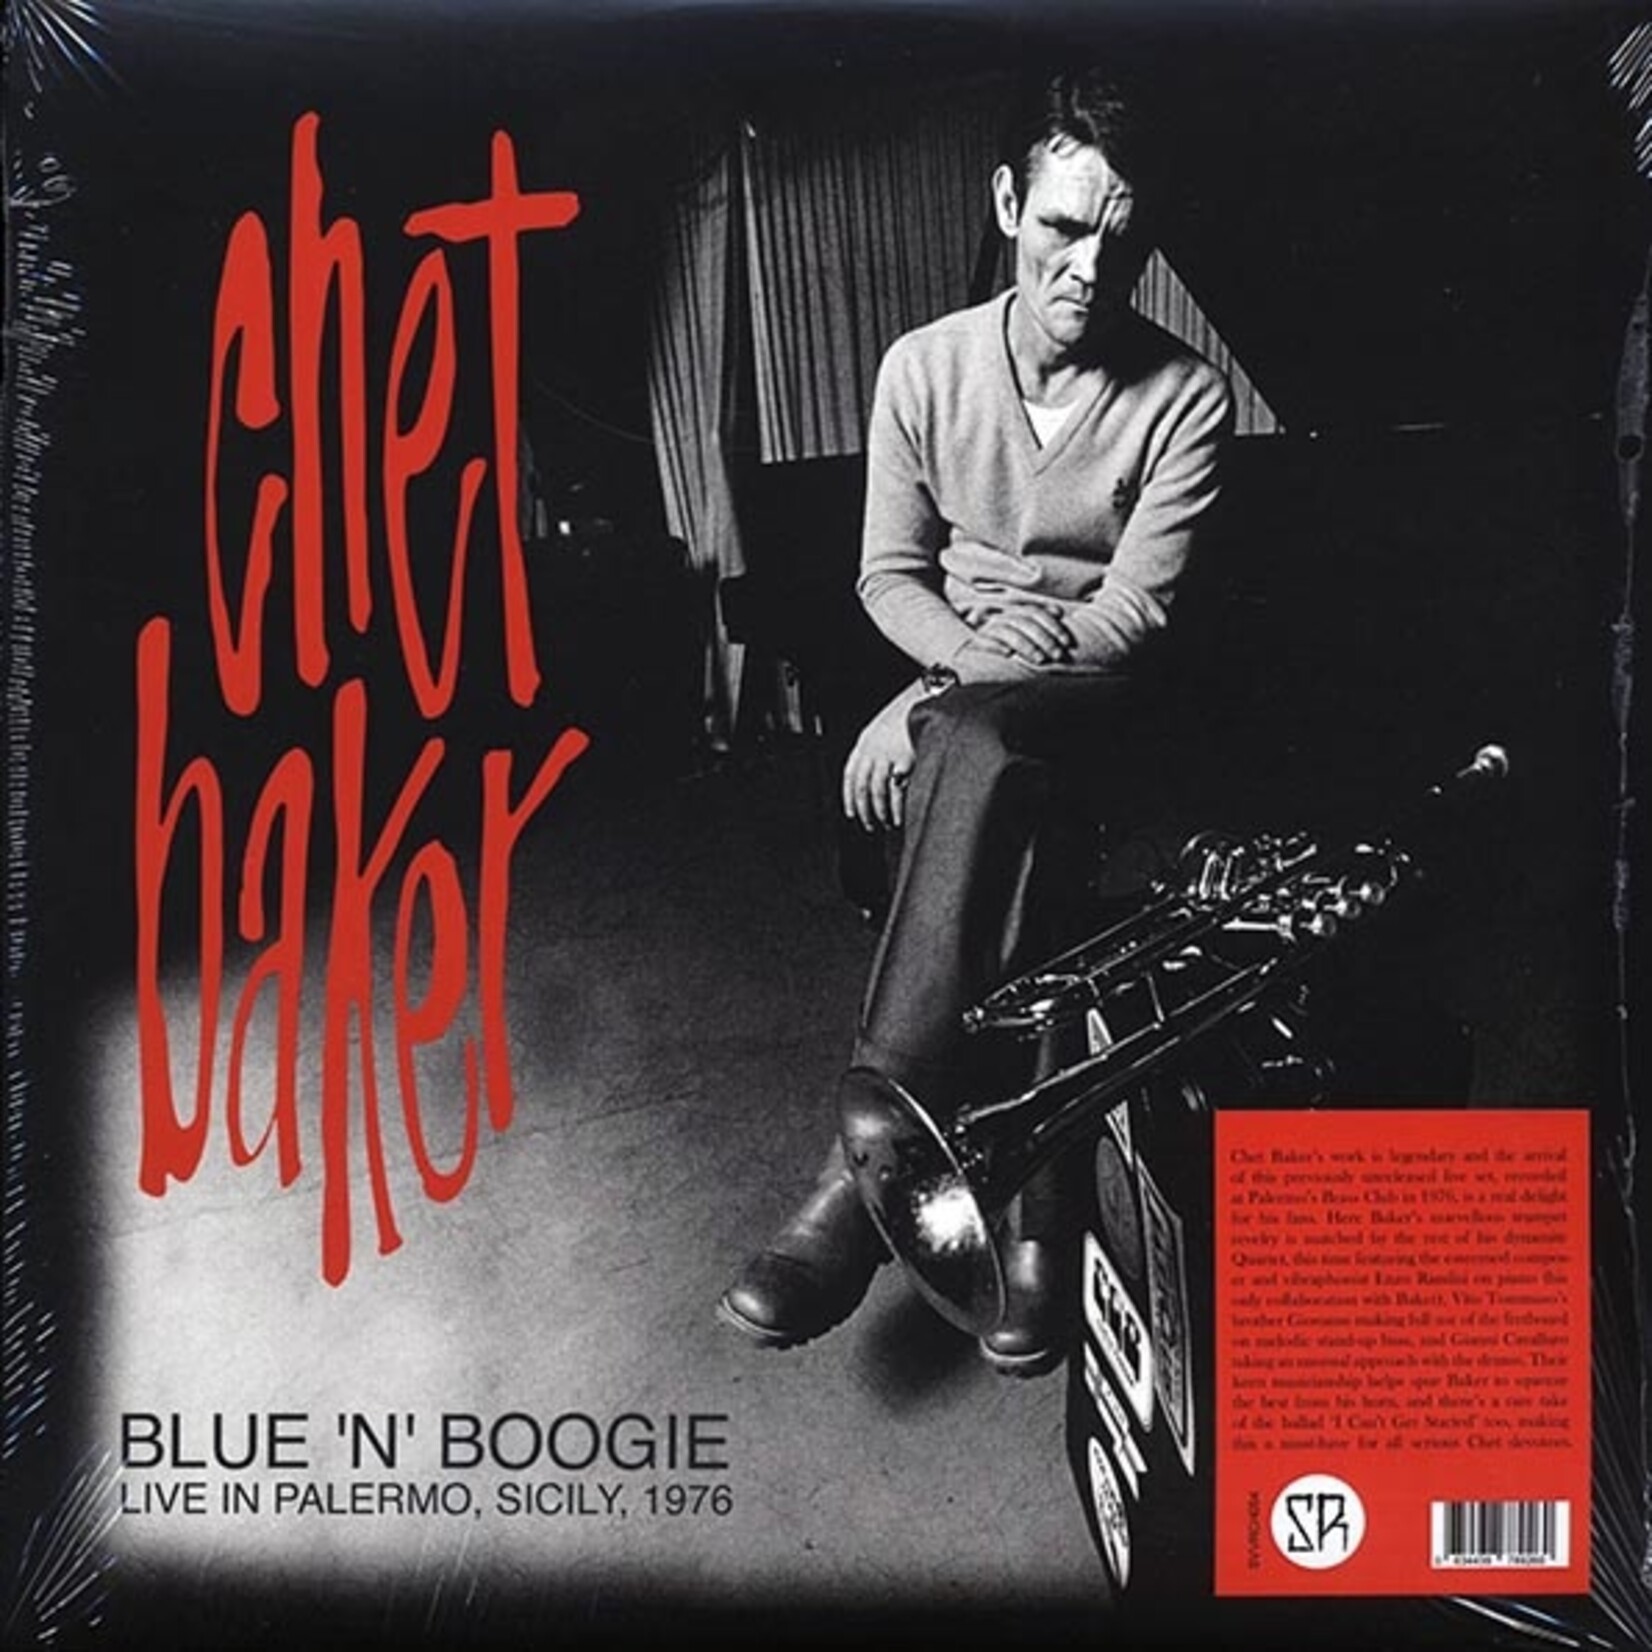 Chet Baker - Blue 'N' Boogie: Live In Palermo, Sicily, 1976 (Survival Research)